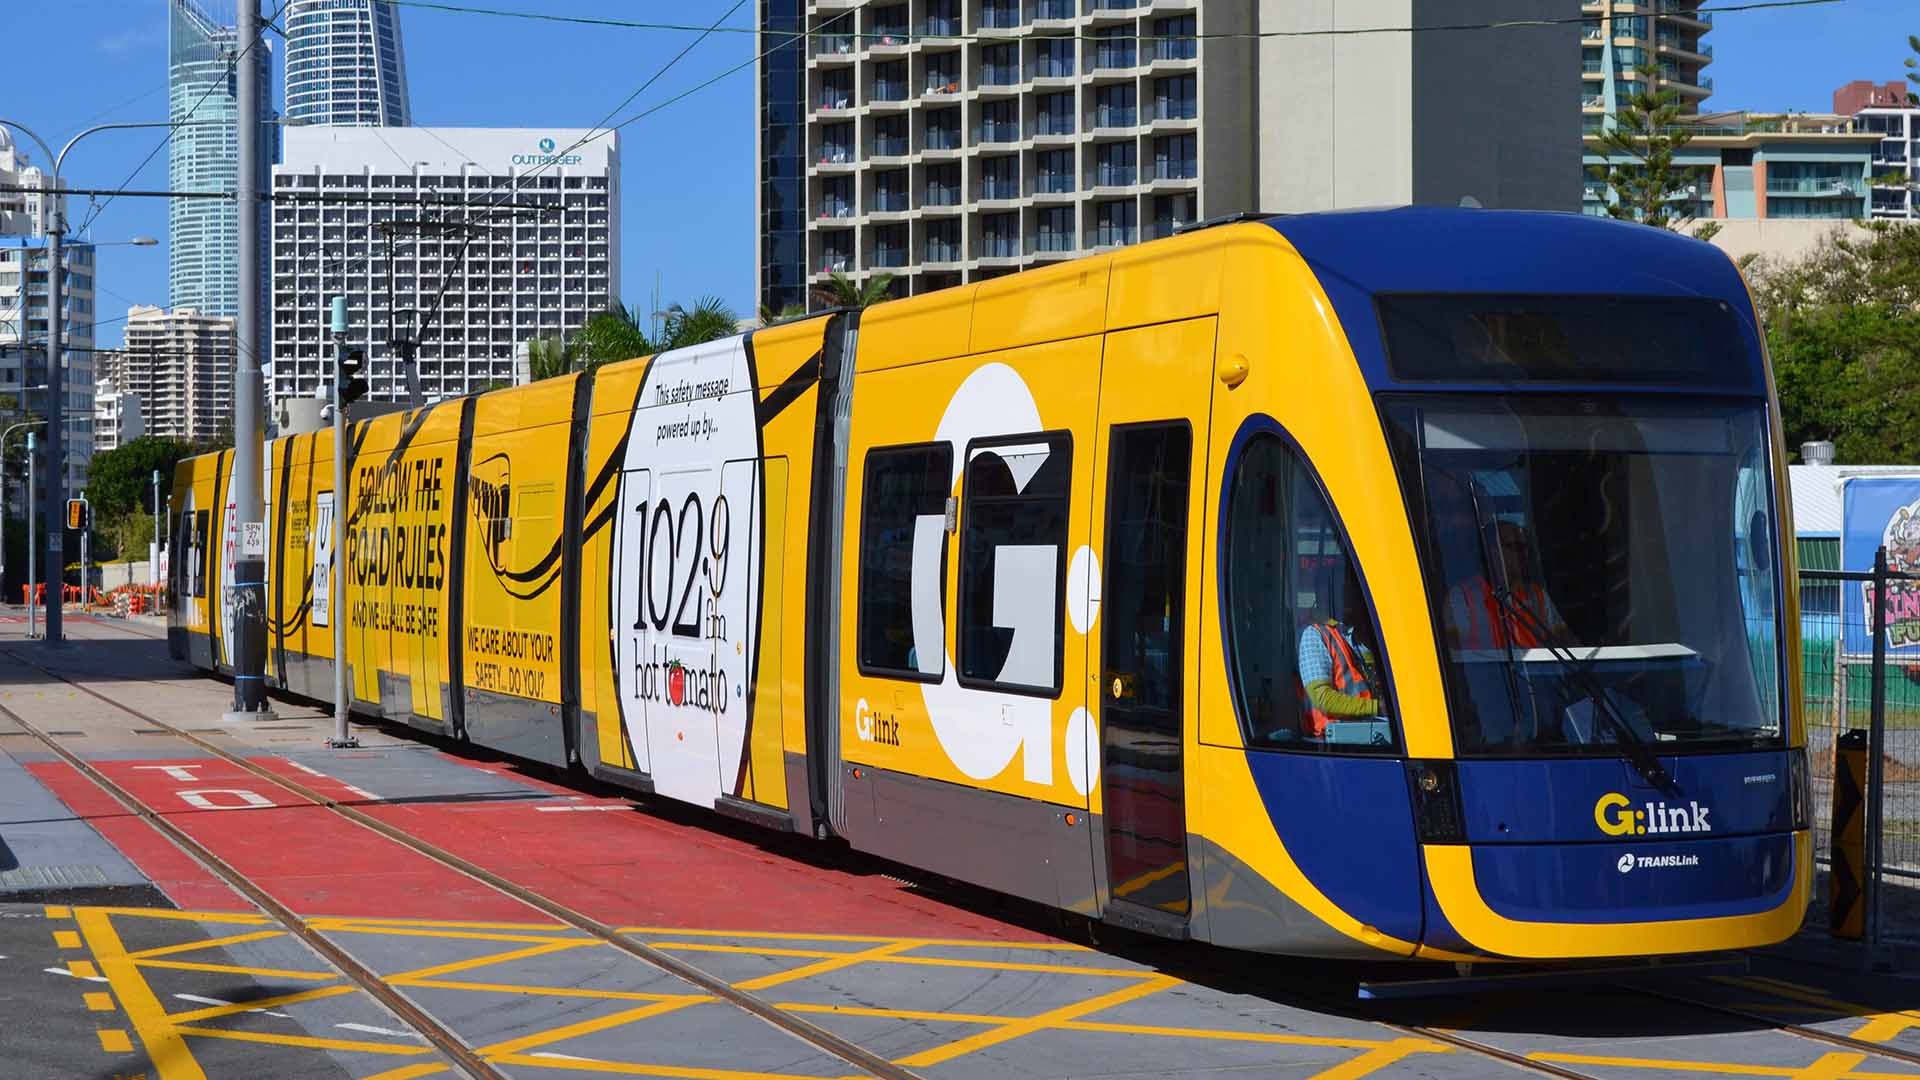 You Can Now Ditch Your Go Card on Gold Coast Trams Thanks to Queensland's Smart-Ticketing Trial